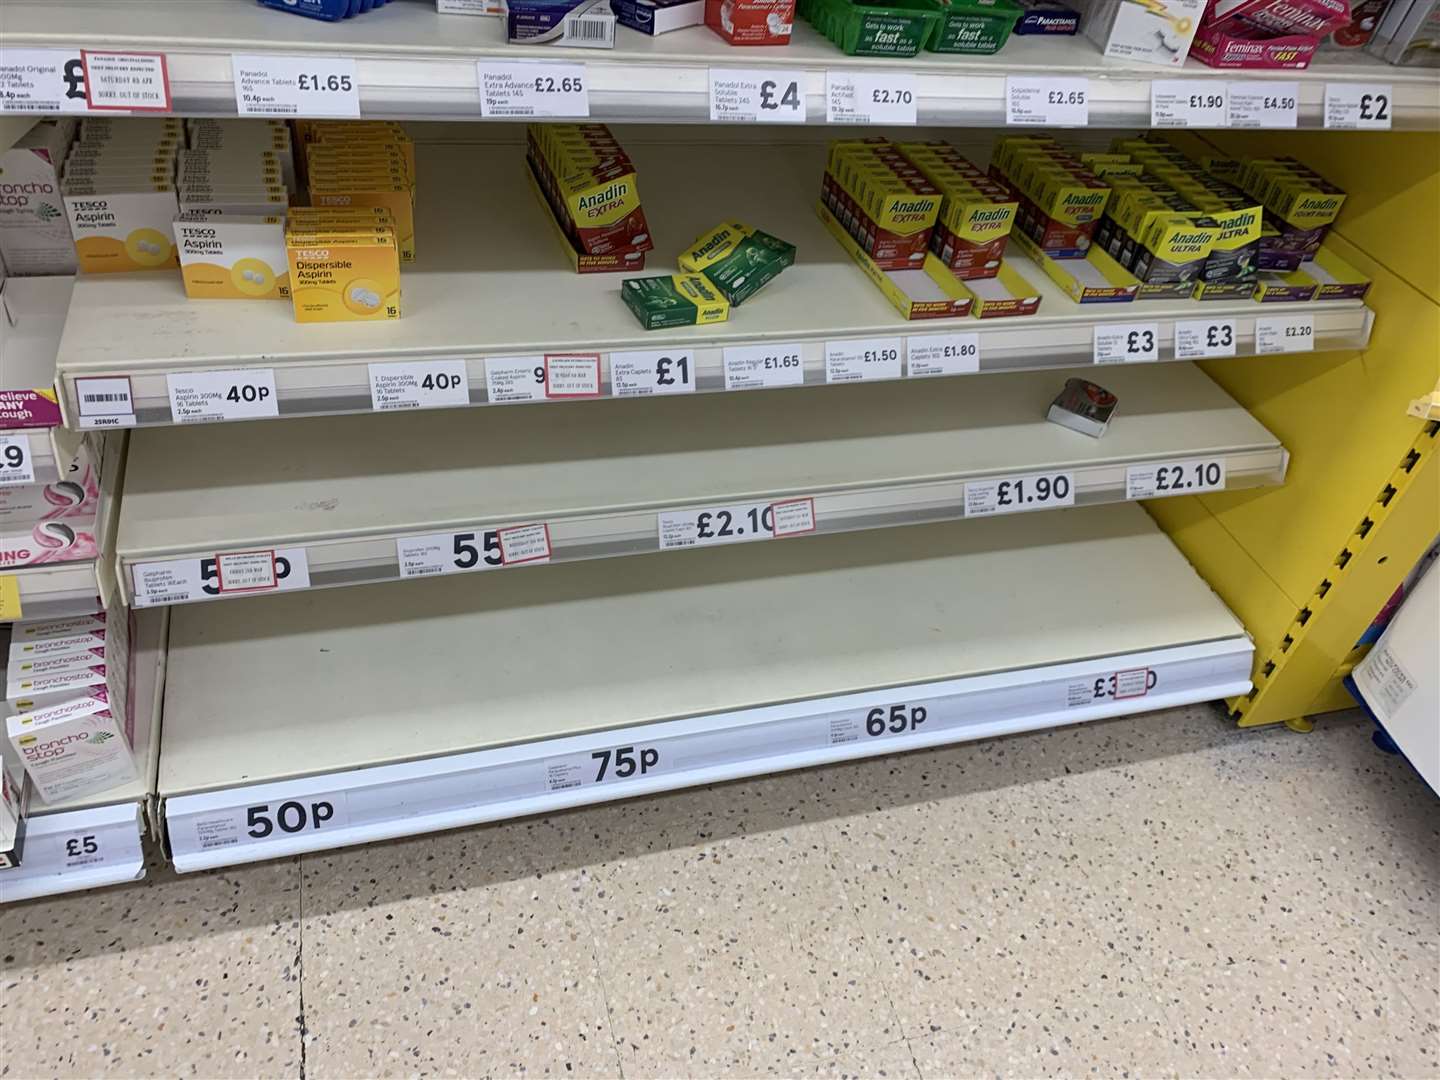 Medication has also been targeted at supermarkets across the country, with shelves left empty by stockpilers